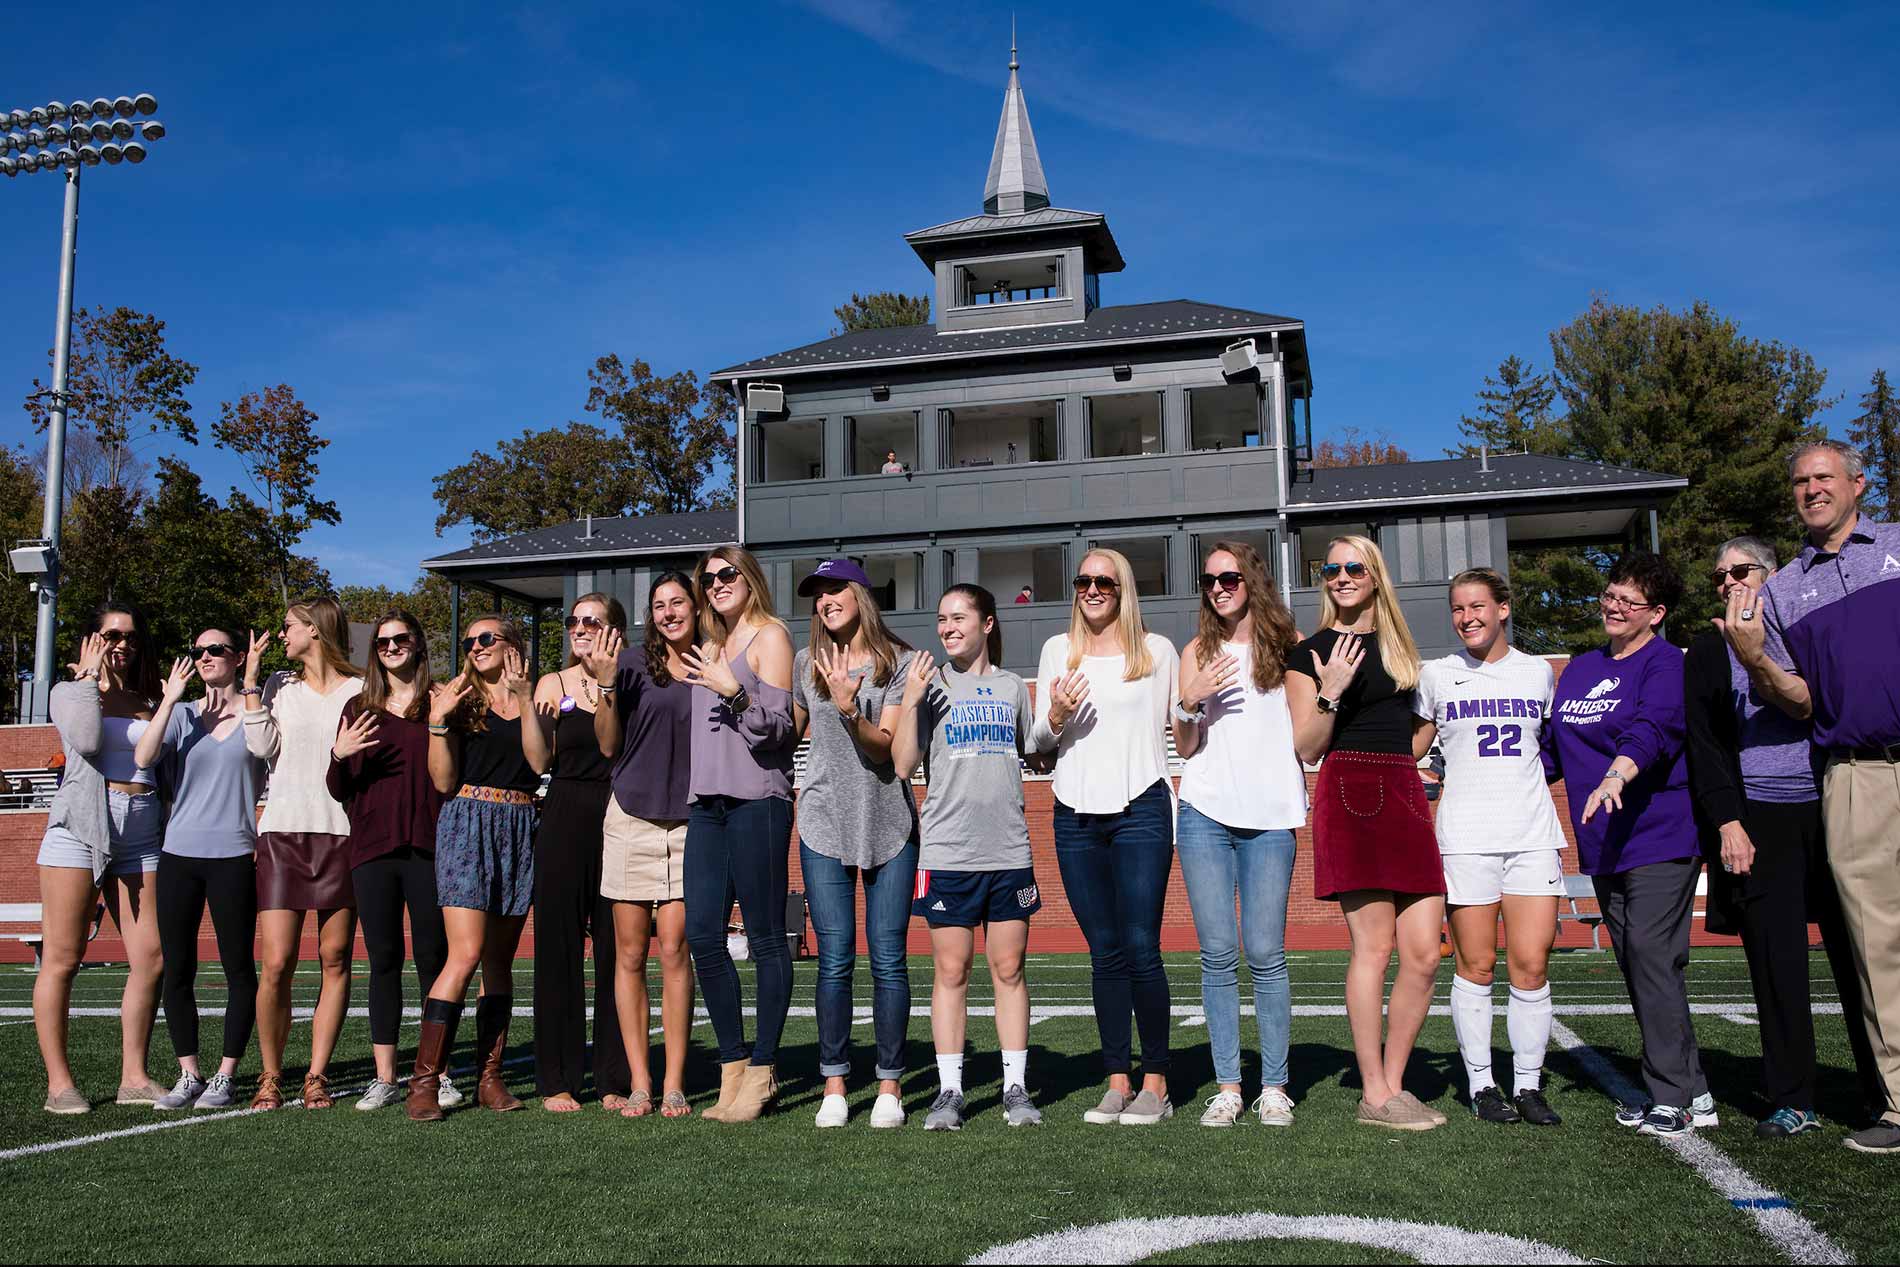 Biddy Martin poses with the women's soccer team during the 2017 homecoming football game.